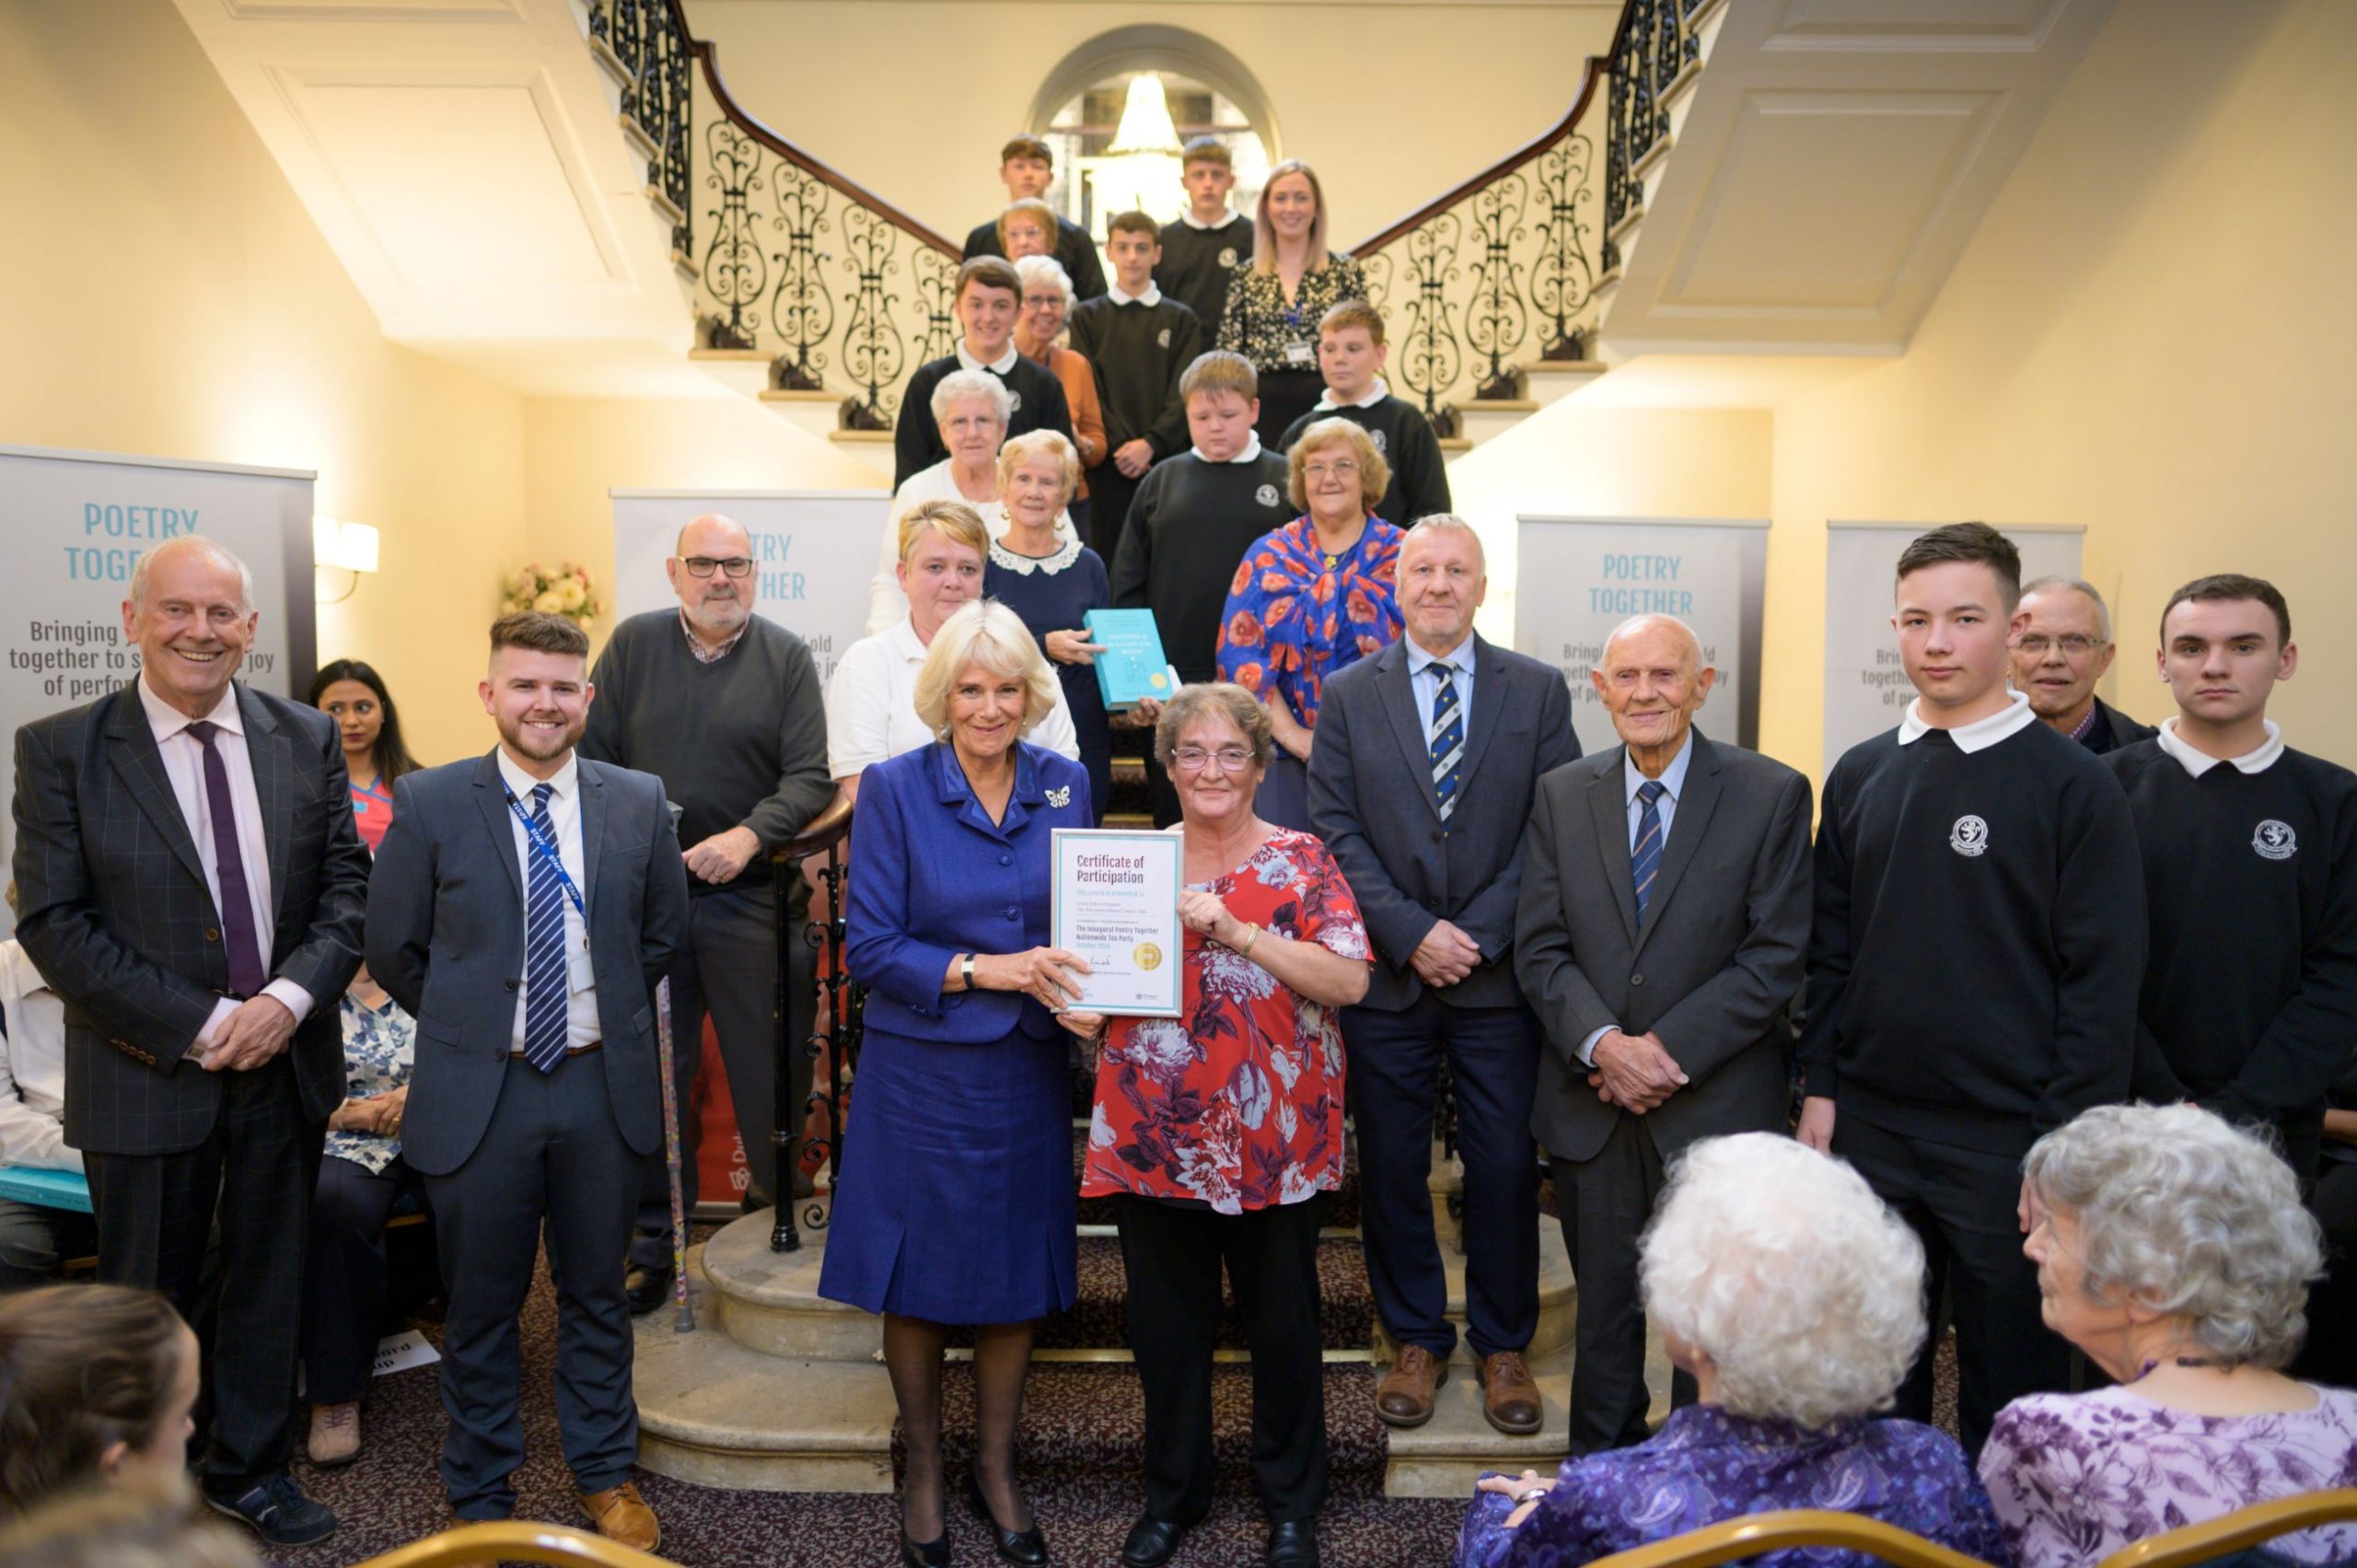 The Duchess of Cornwall awarding a certificate